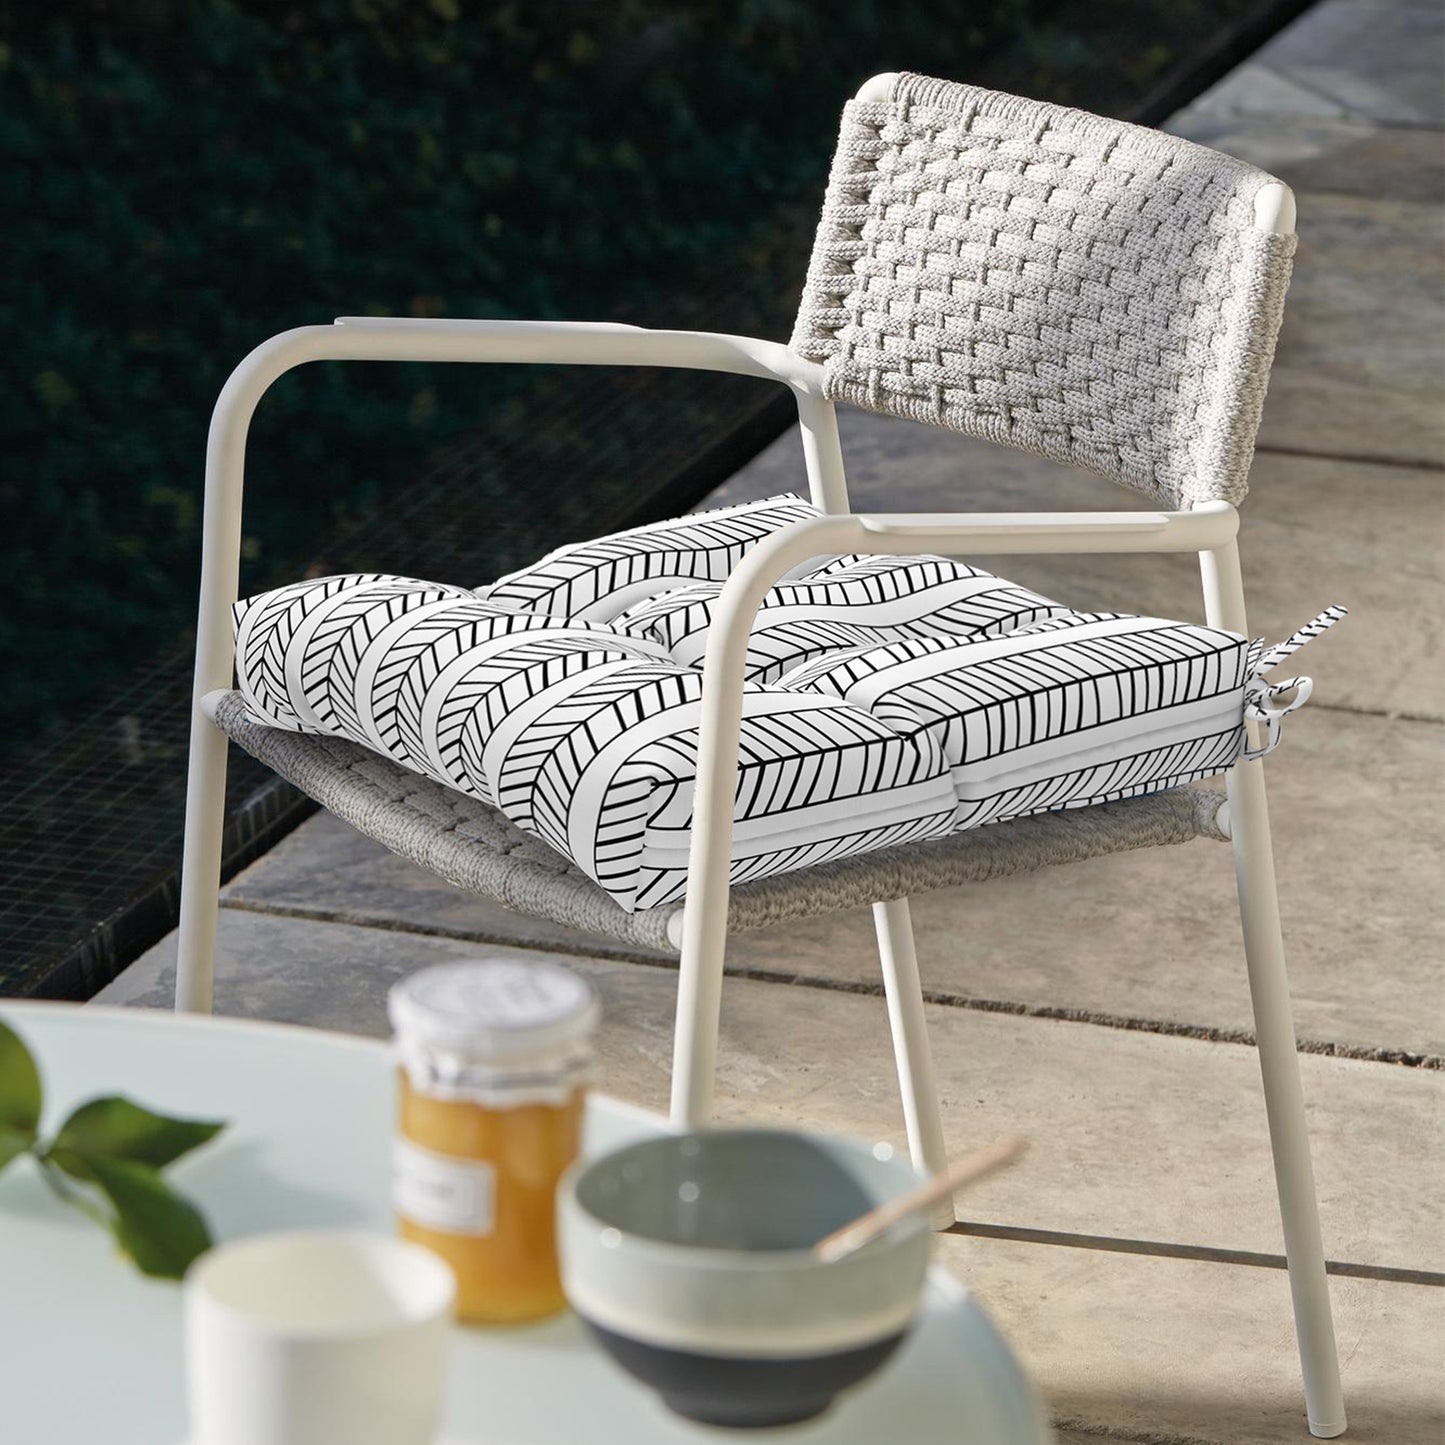 Melody Elephant Indoor/Outdoor Square Tufted Seat Cushions with Ties, Fade Resistant Patio Wicker Thick Chair Pads Pack of 2, 19 x 19 x 5 Inch, HerringboneWhite